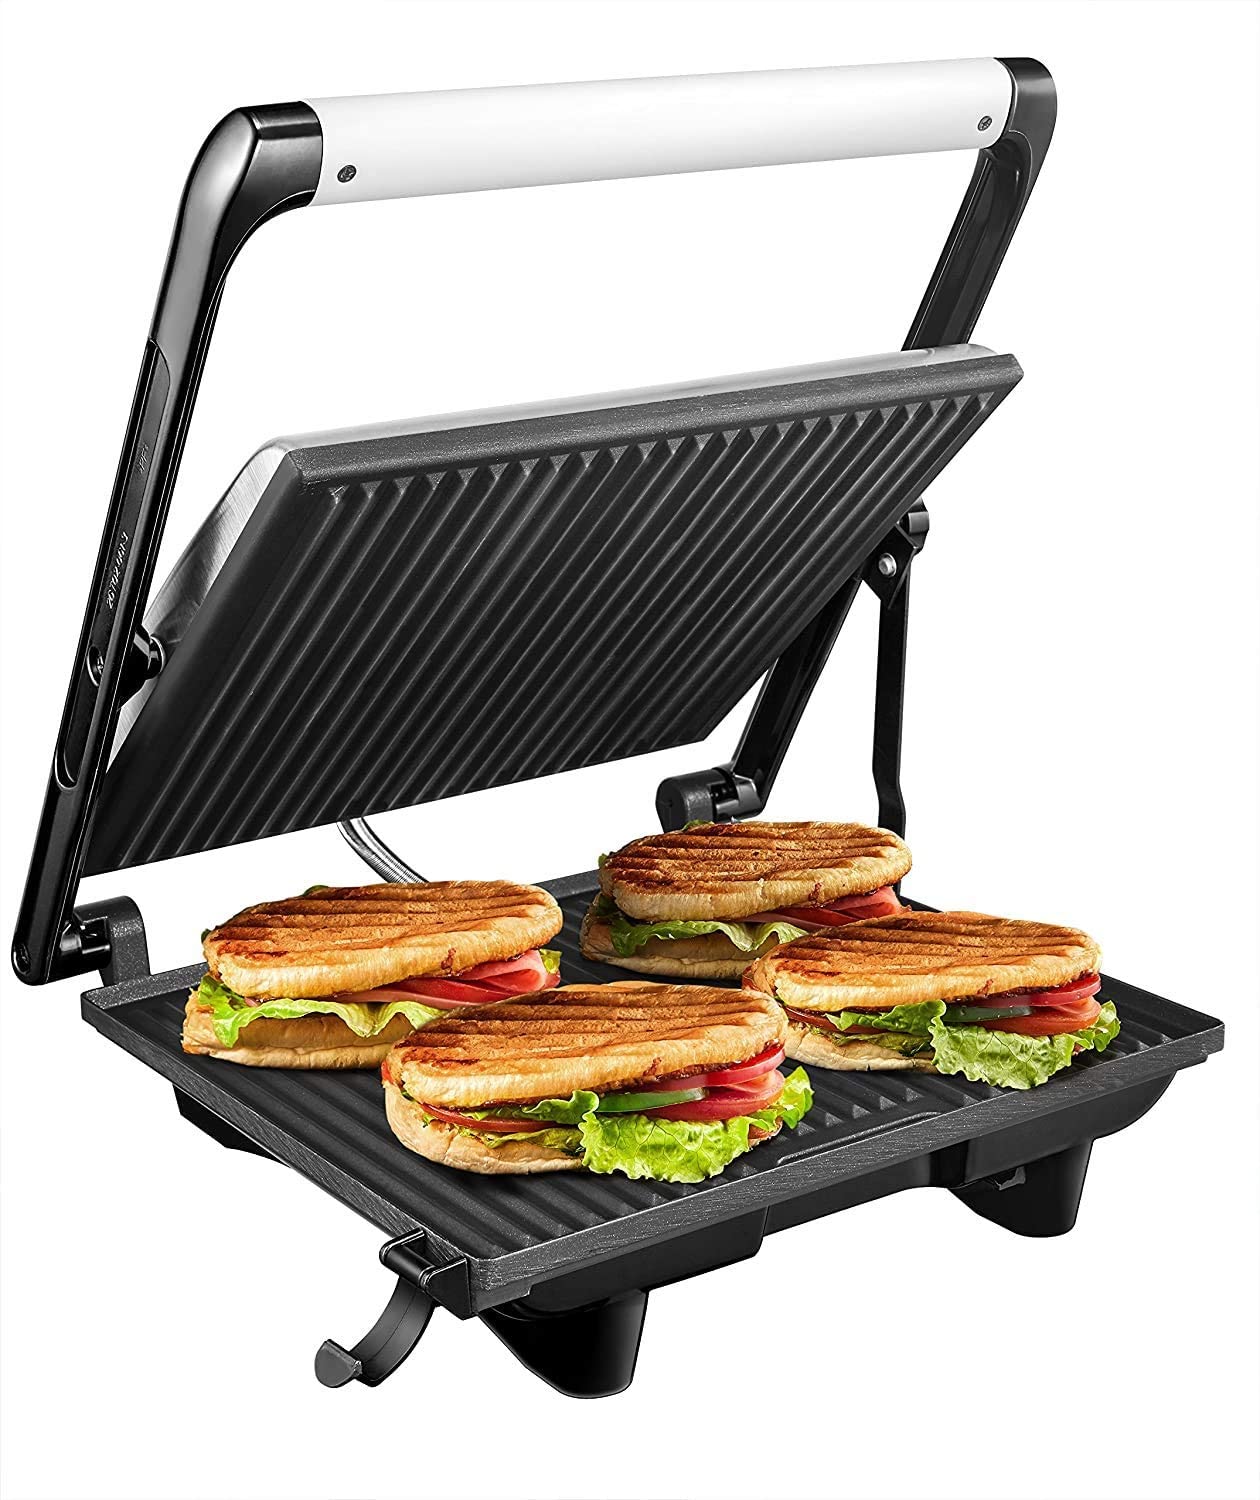 AAUU Contact grill Panini grill, sandwich toaster, 2000 W electric table grills for sandwiches, steak and panini, non-stick coated plates 32 cm x 26 cm, stainless steel housing, silver